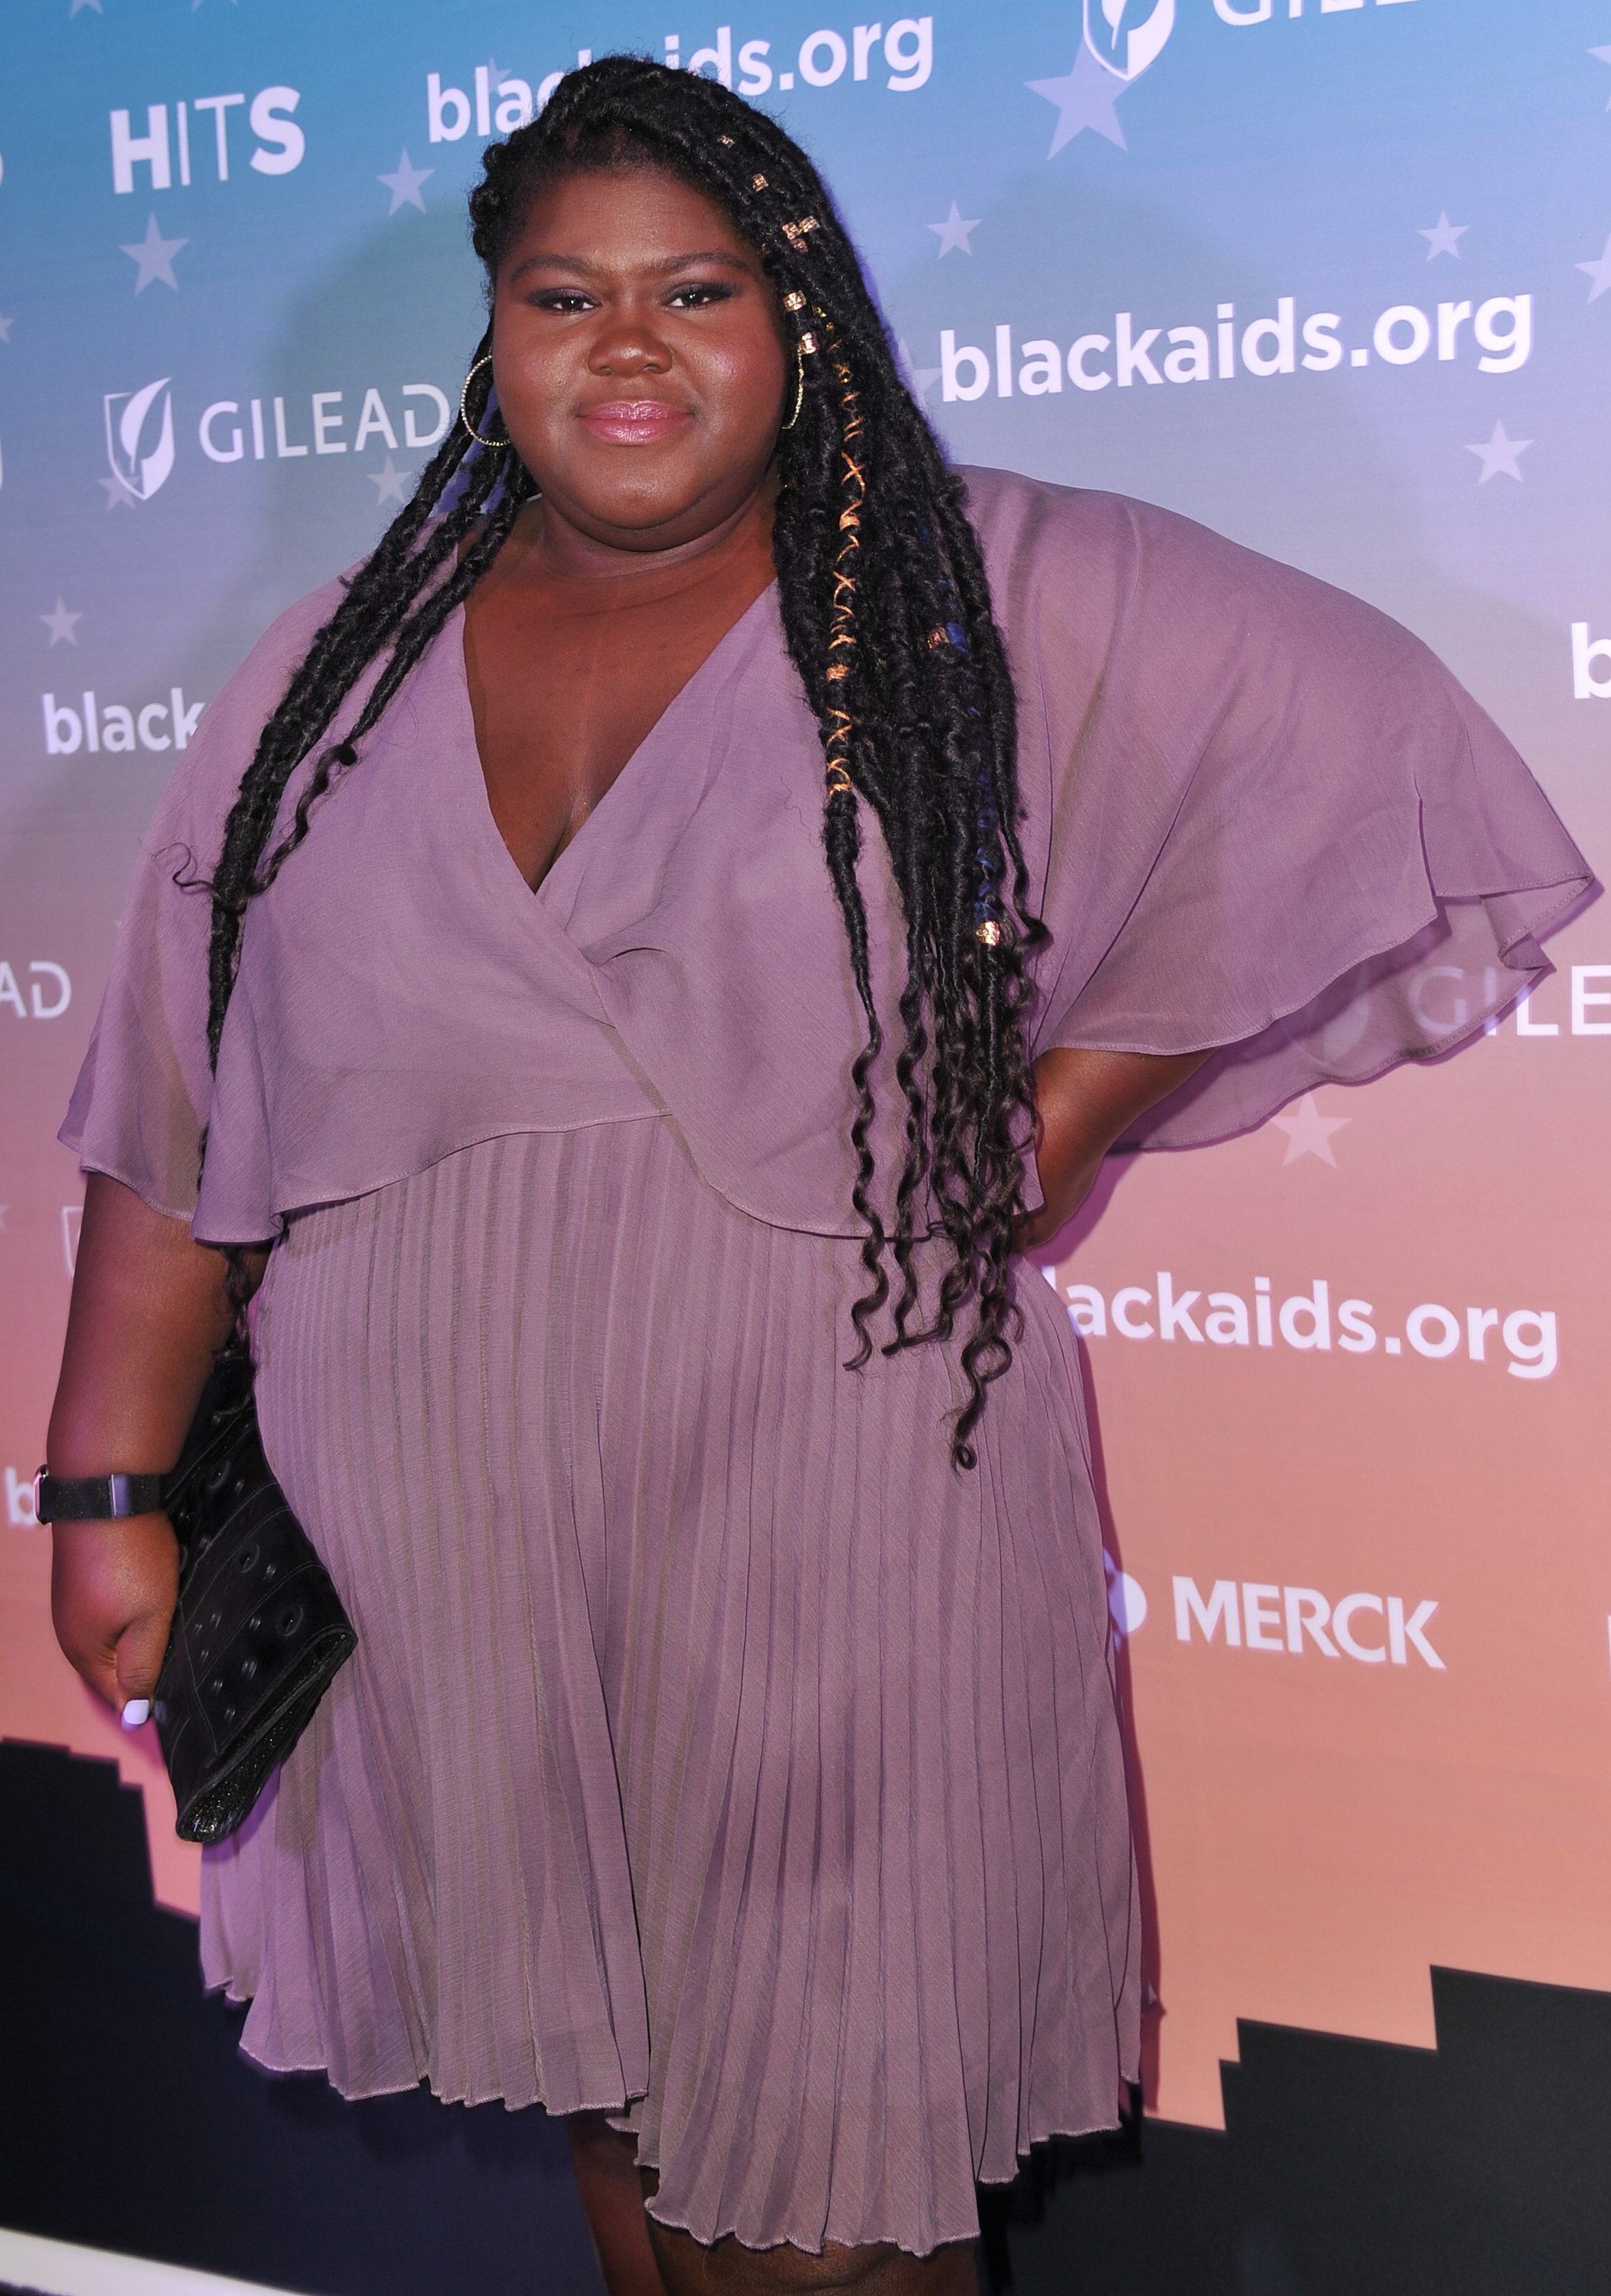 Gabourey Sidibe at the Black AIDS Institute's 2018 Heroes in The Struggle Gala, 2018 in Los Angeles, California | Source: Getty Images